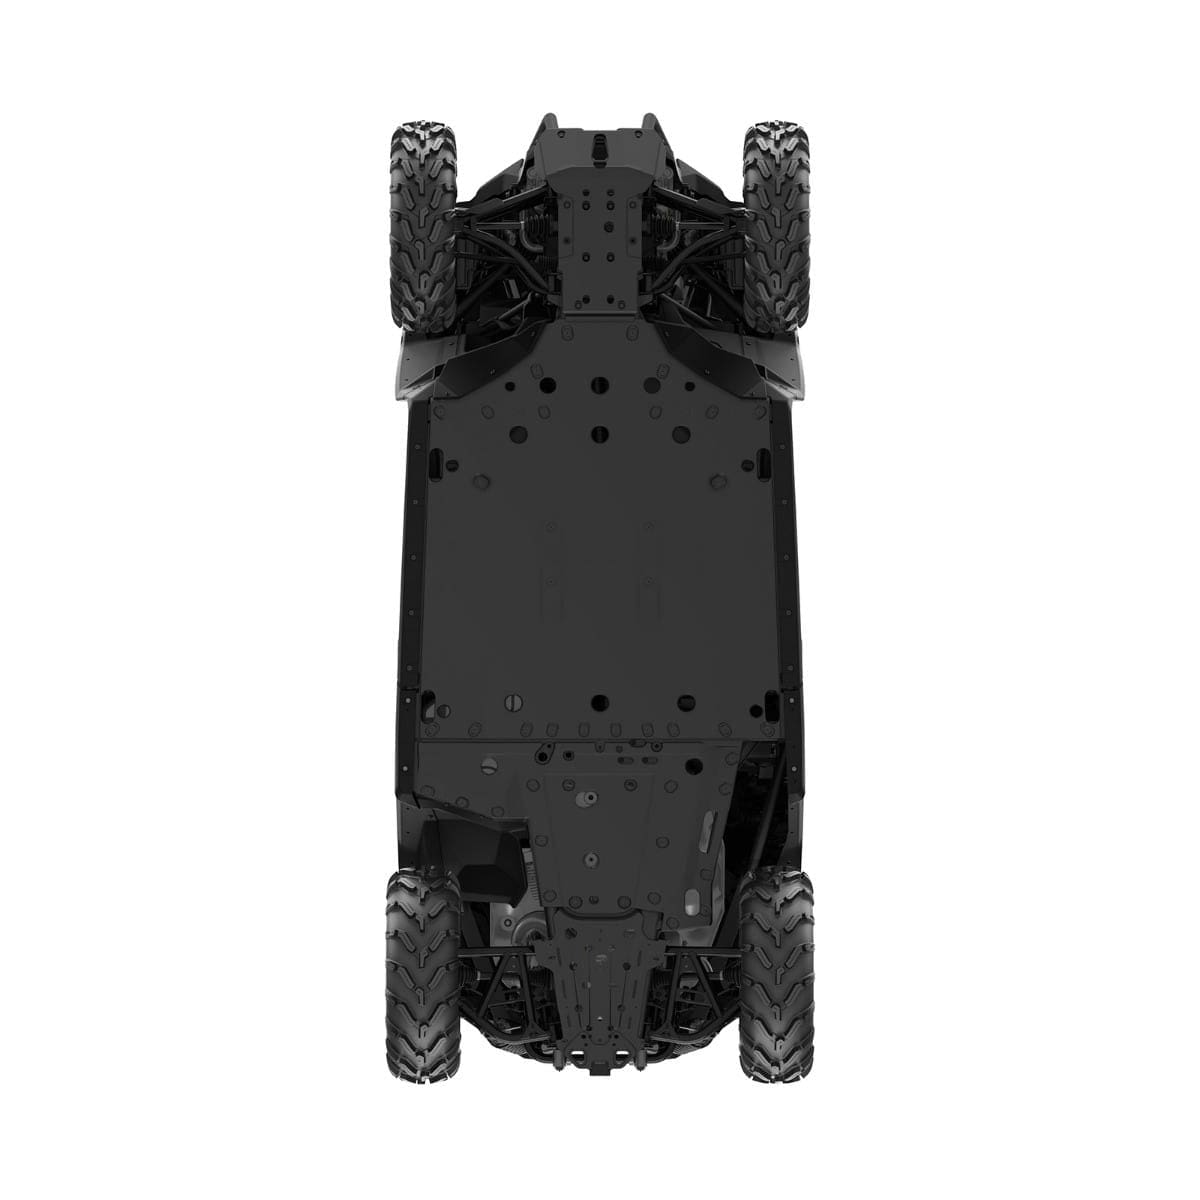 HMWPE Front Skid Plate